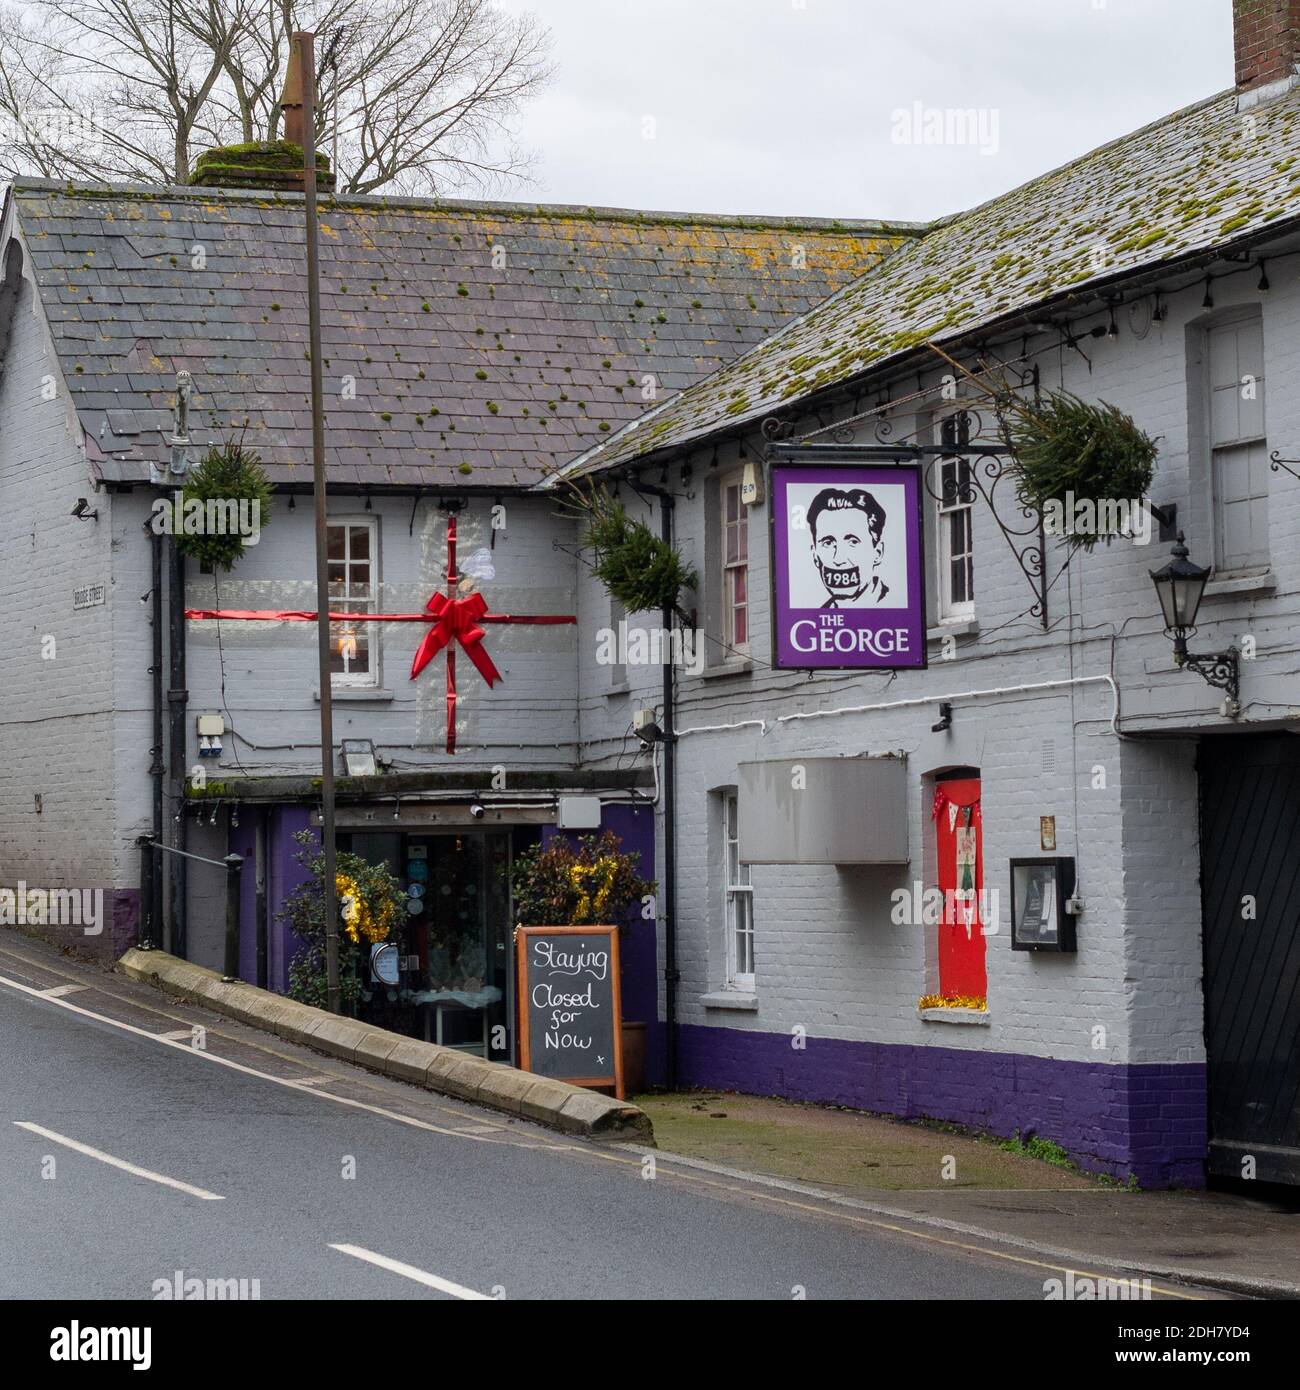 Fordingbridge, New Forest, Hampshire, UK, 10th December 2020. The George riverside pub remains closed after Lockdown 2 with the area now in Tier 2 of coronavirus restrictions. The New Forest district was in Tier 1 before the second lockdown. A new pub sign hangs outside the entrance. Credit: Paul Biggins/Alamy Live News Stock Photo